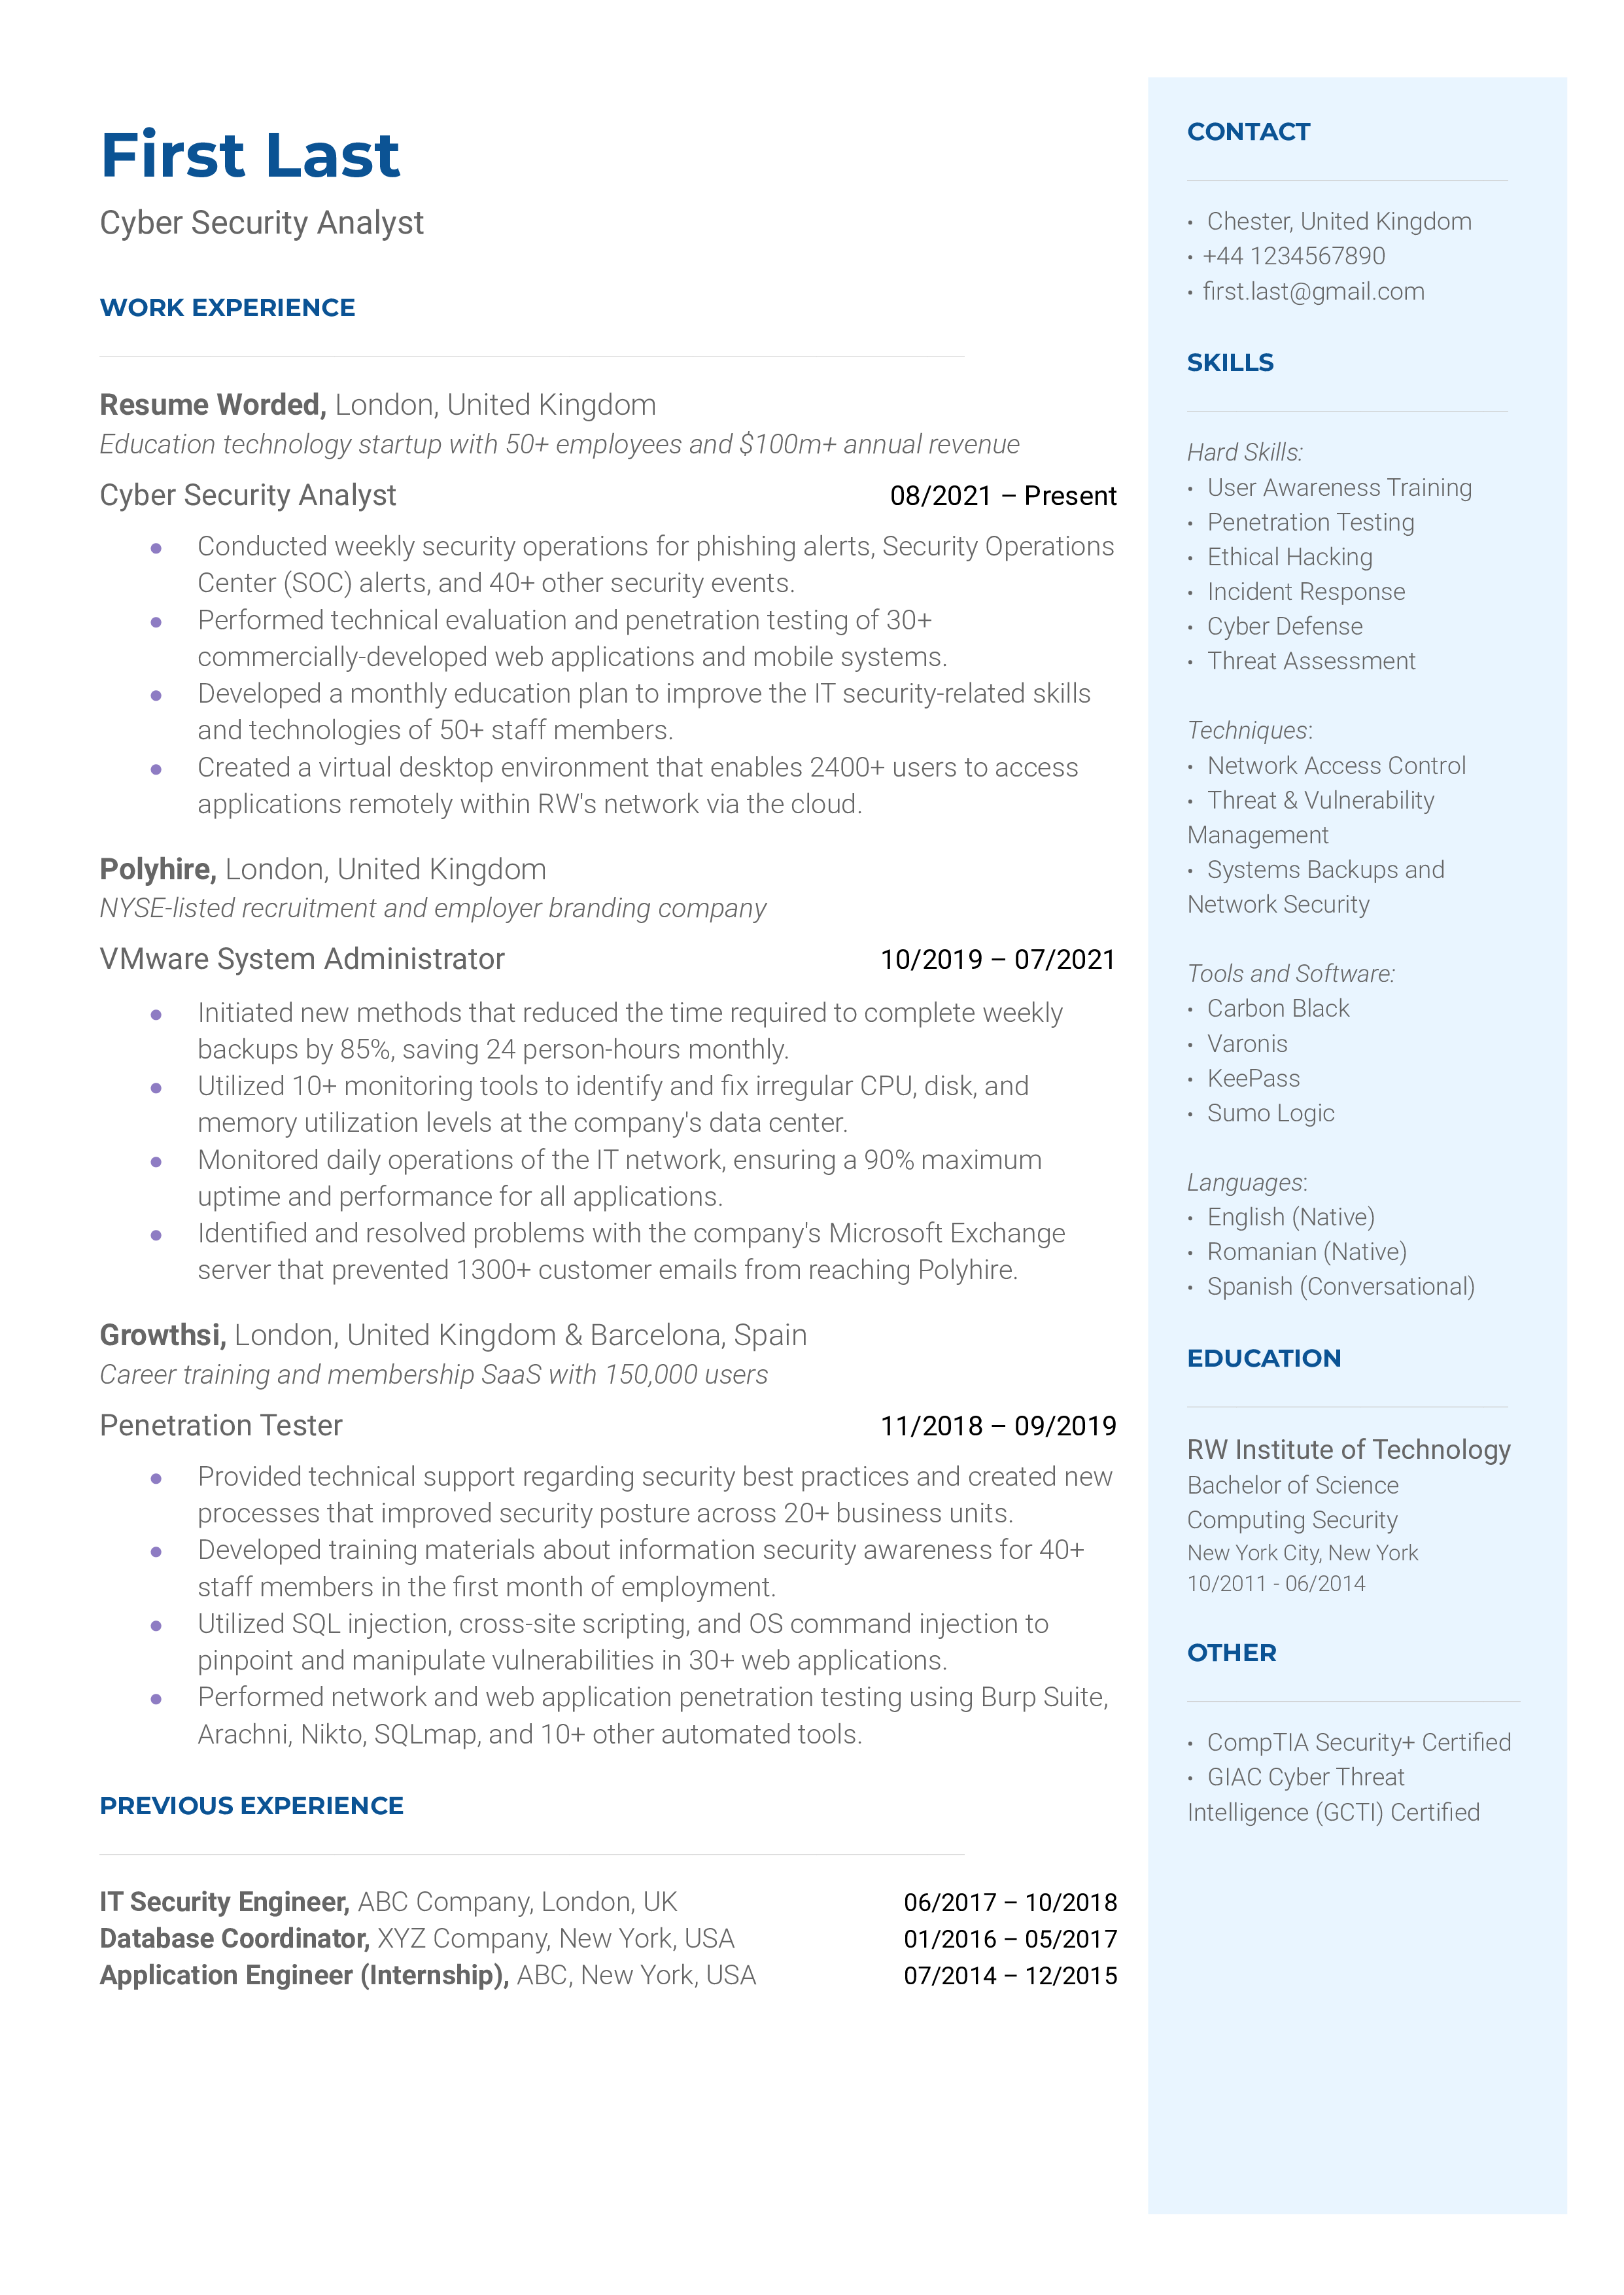 Snapshot of a Cyber Security Analyst's CV showcasing relevant skills, experience and certifications.